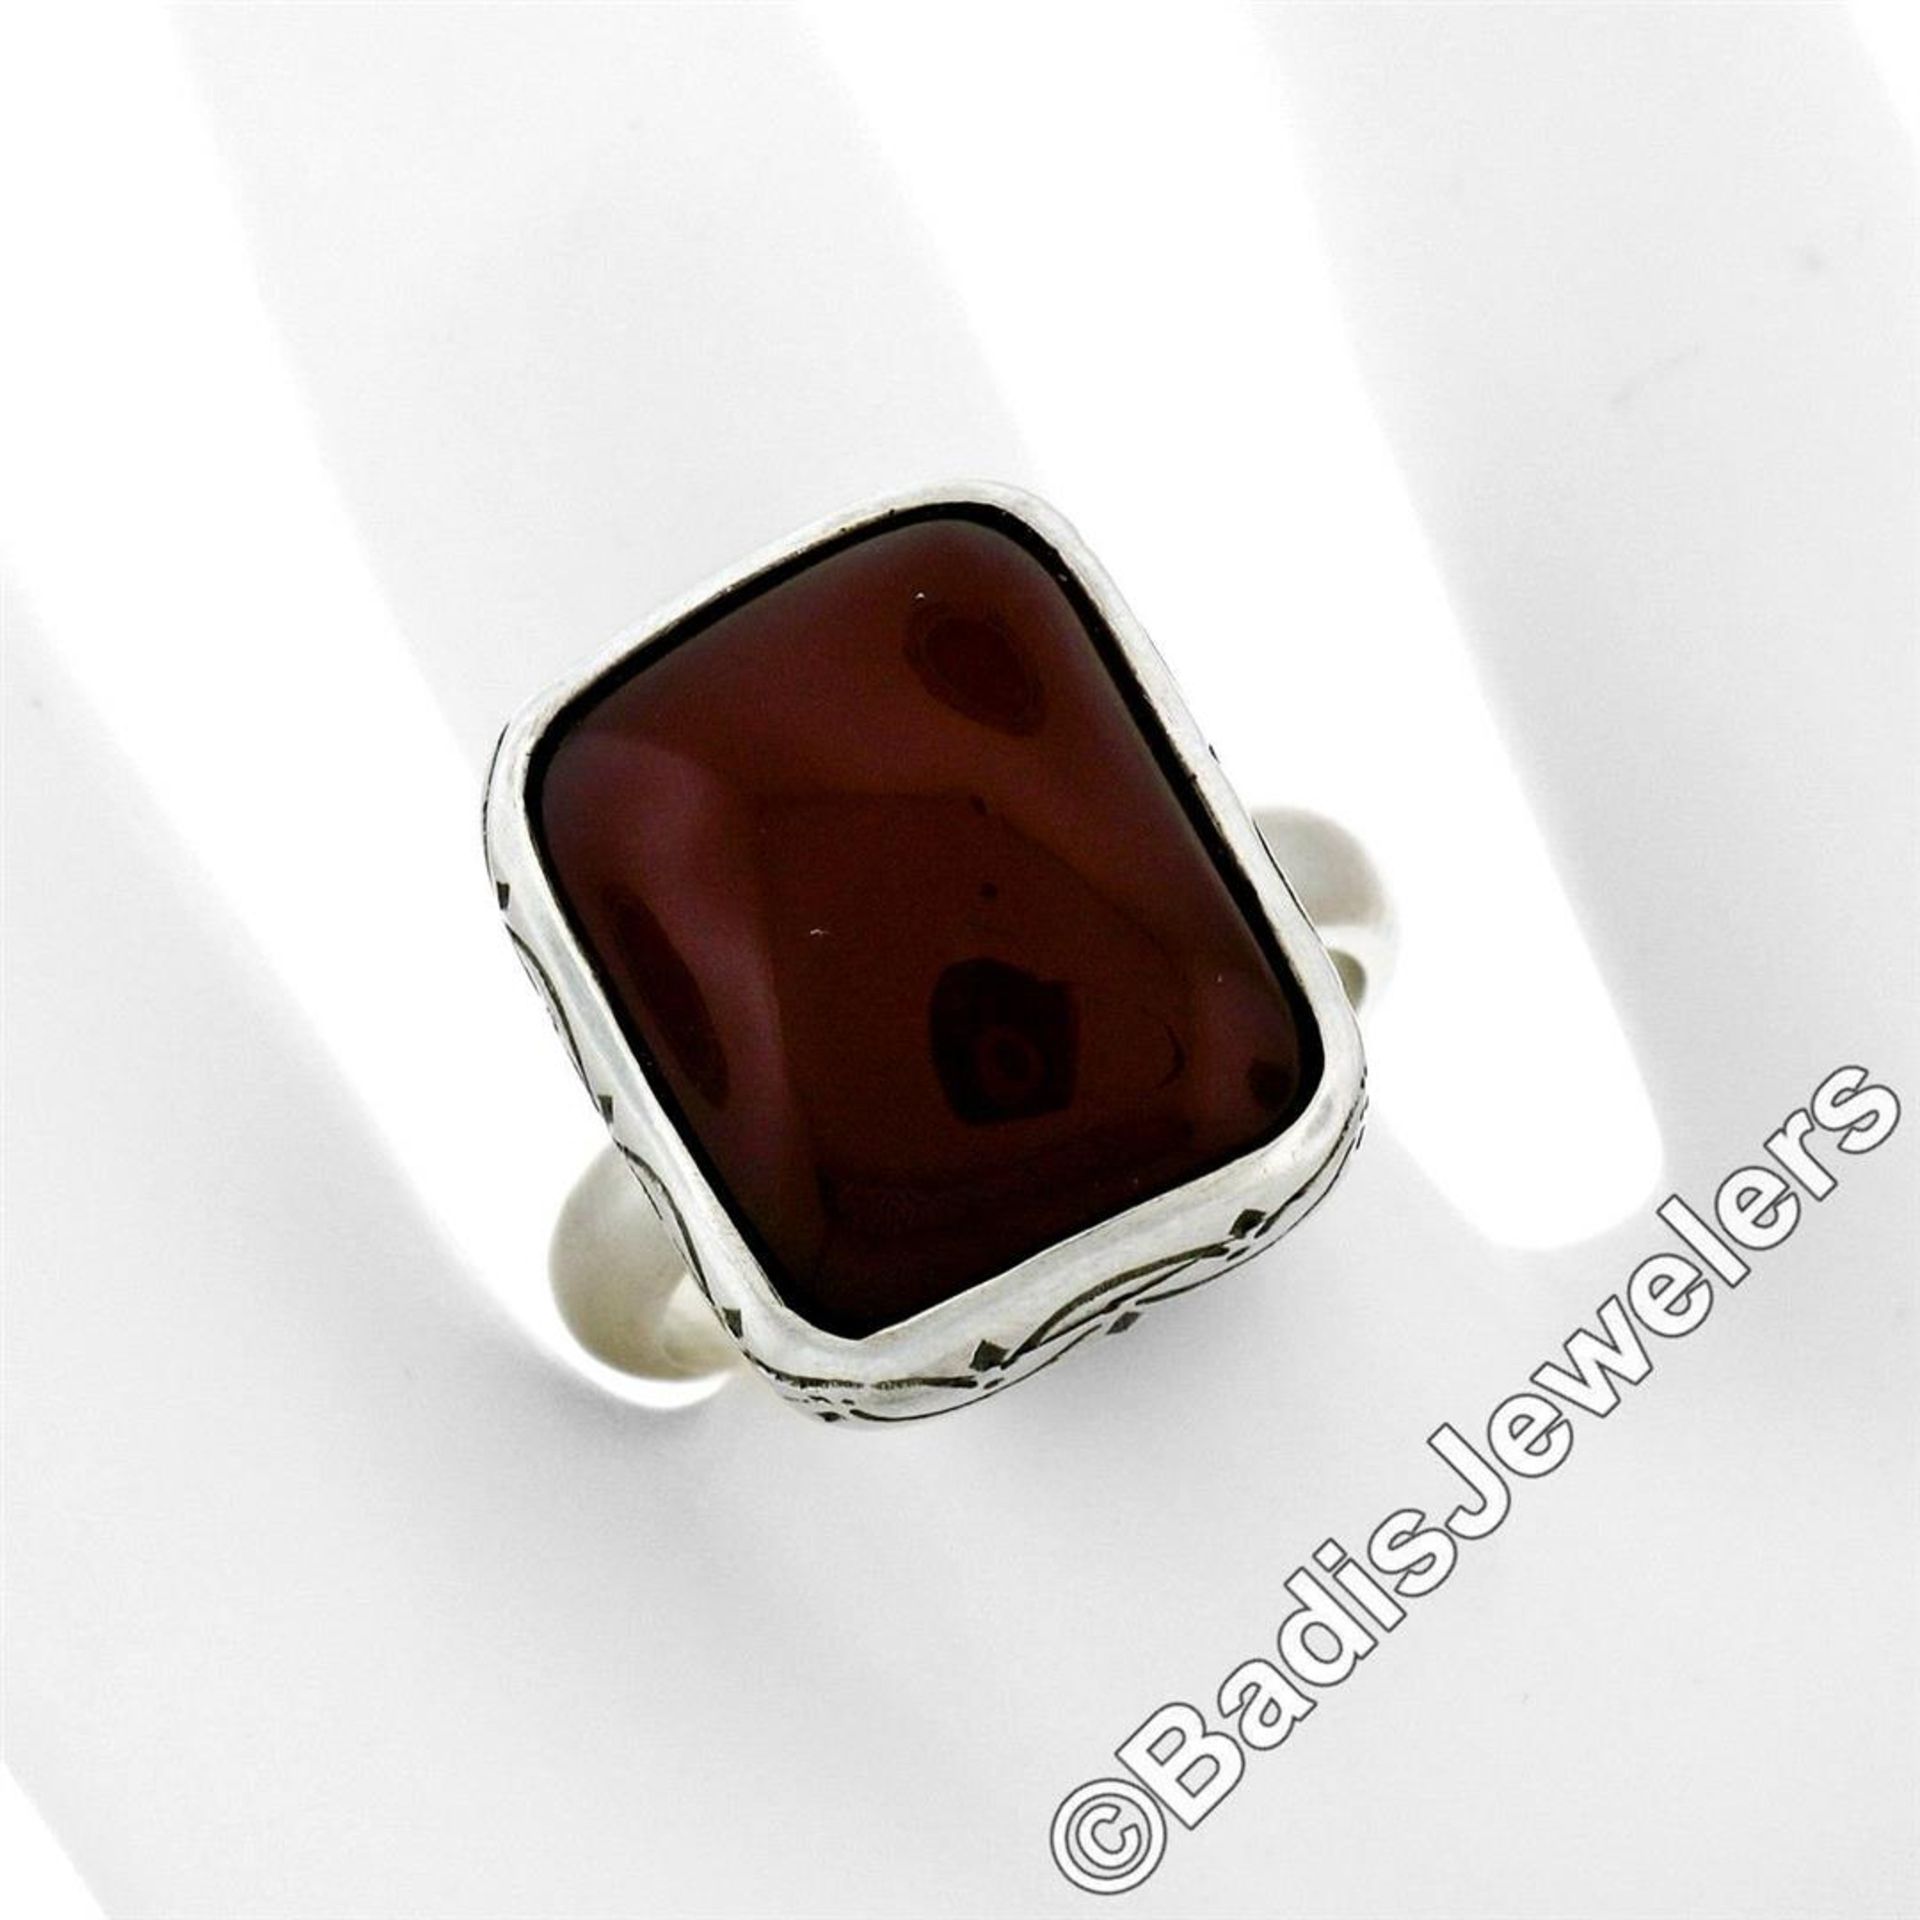 Vintage Sterling Silver Cushion Cabochon Carnelian Solitaire Ring - Image 4 of 7